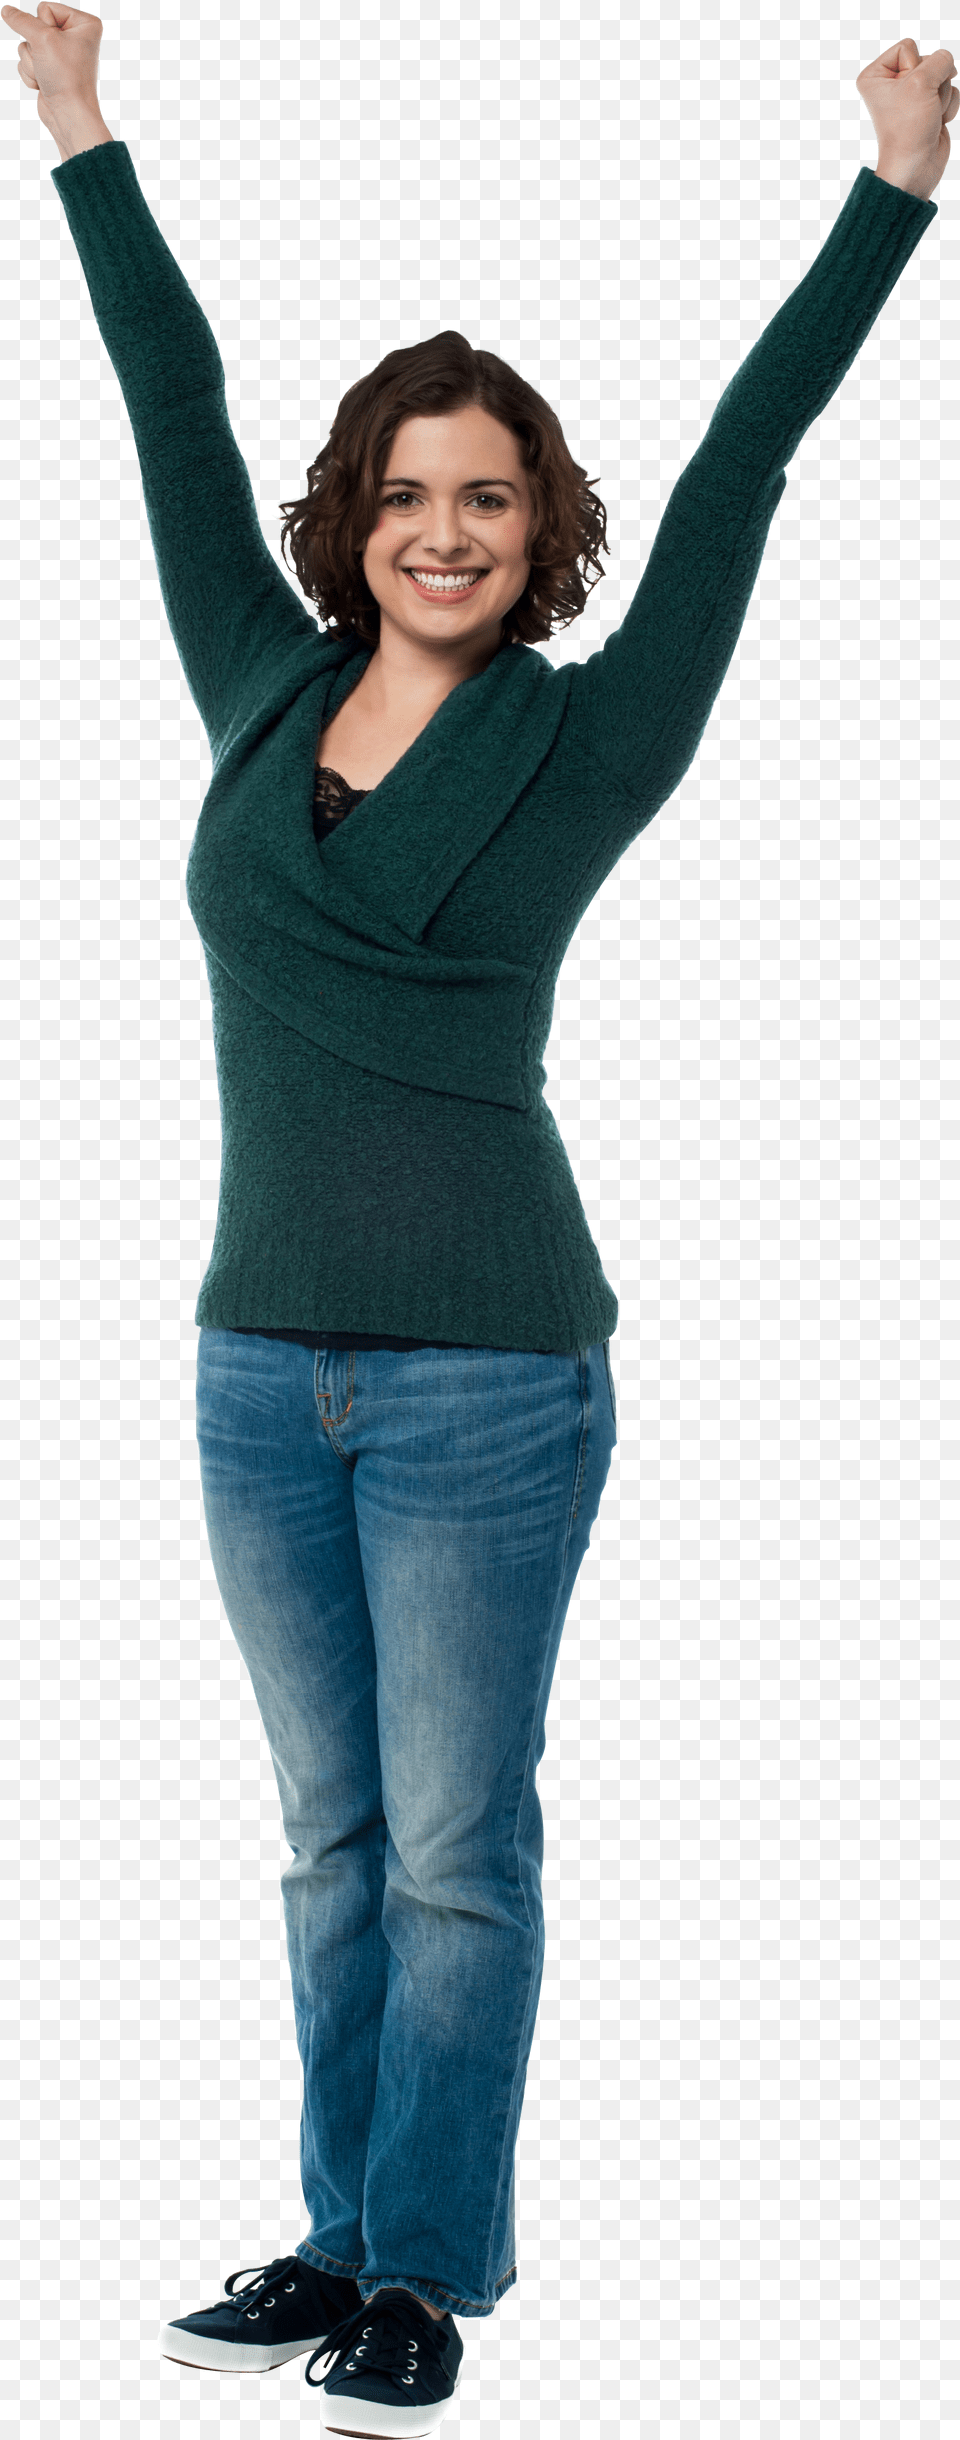 Happy Person Images Woman With Raised Arms, Adult, Smile, Sleeve, Pants Png